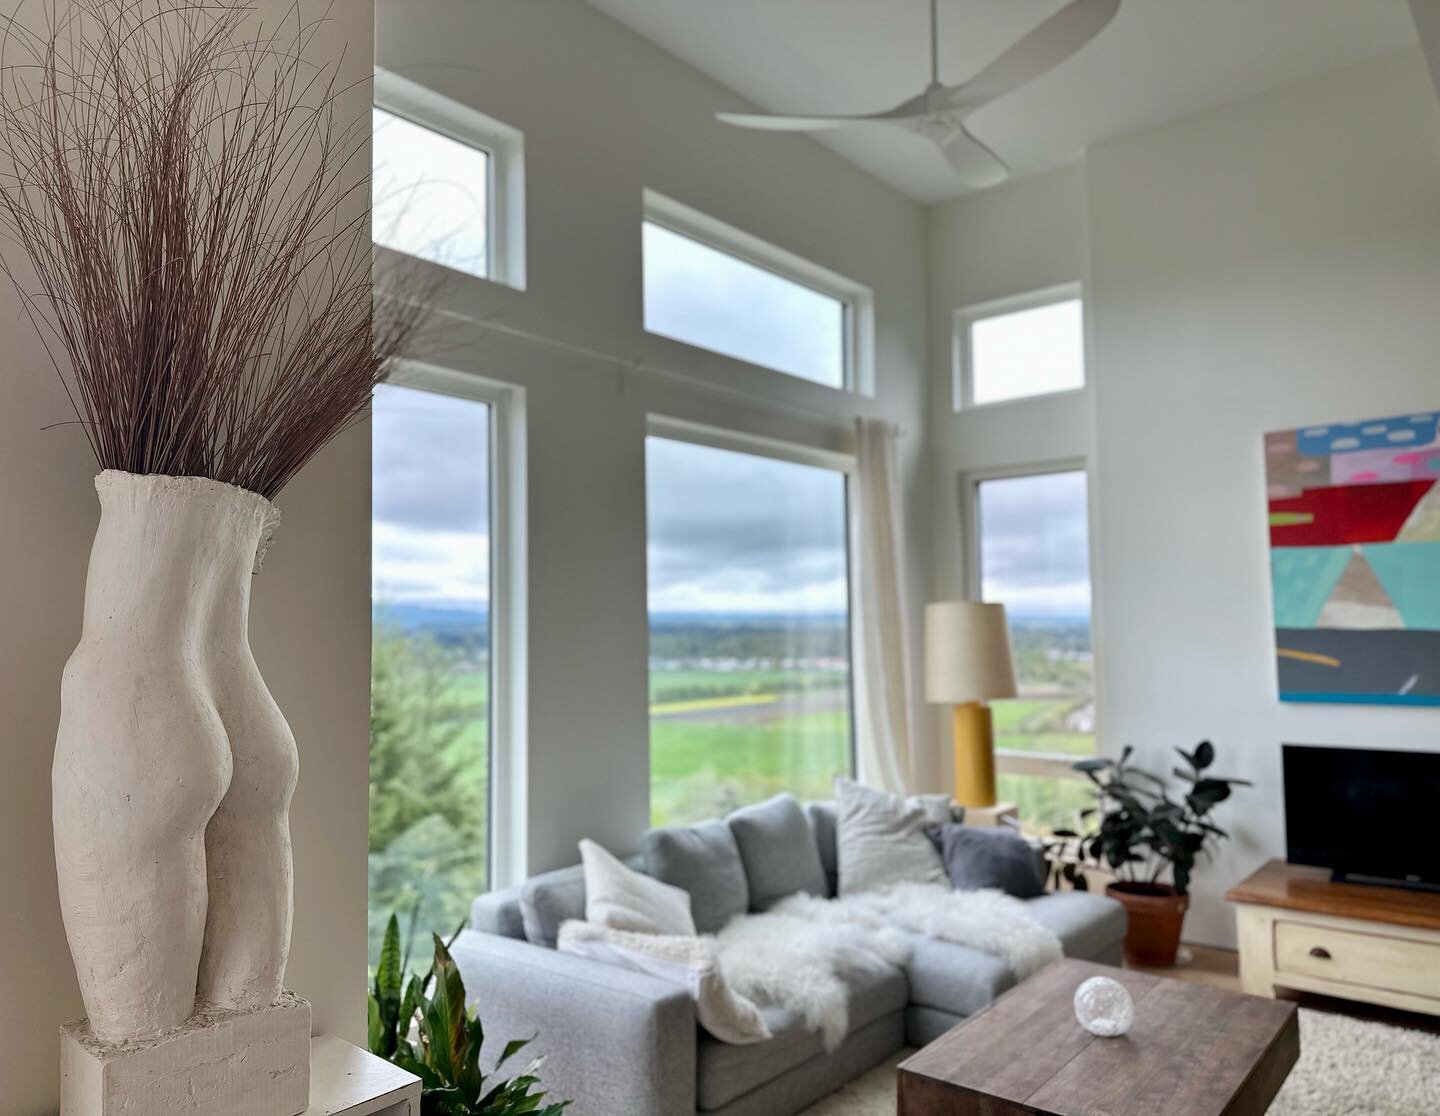 🎨🌟 Exciting news! Big Sky Gallery is coming soon, and it's not your average rental. With floor-to-ceiling windows and stunning views, you'll feel like you're living in a work of art. And that's because this unique space is owned and decorated by a 